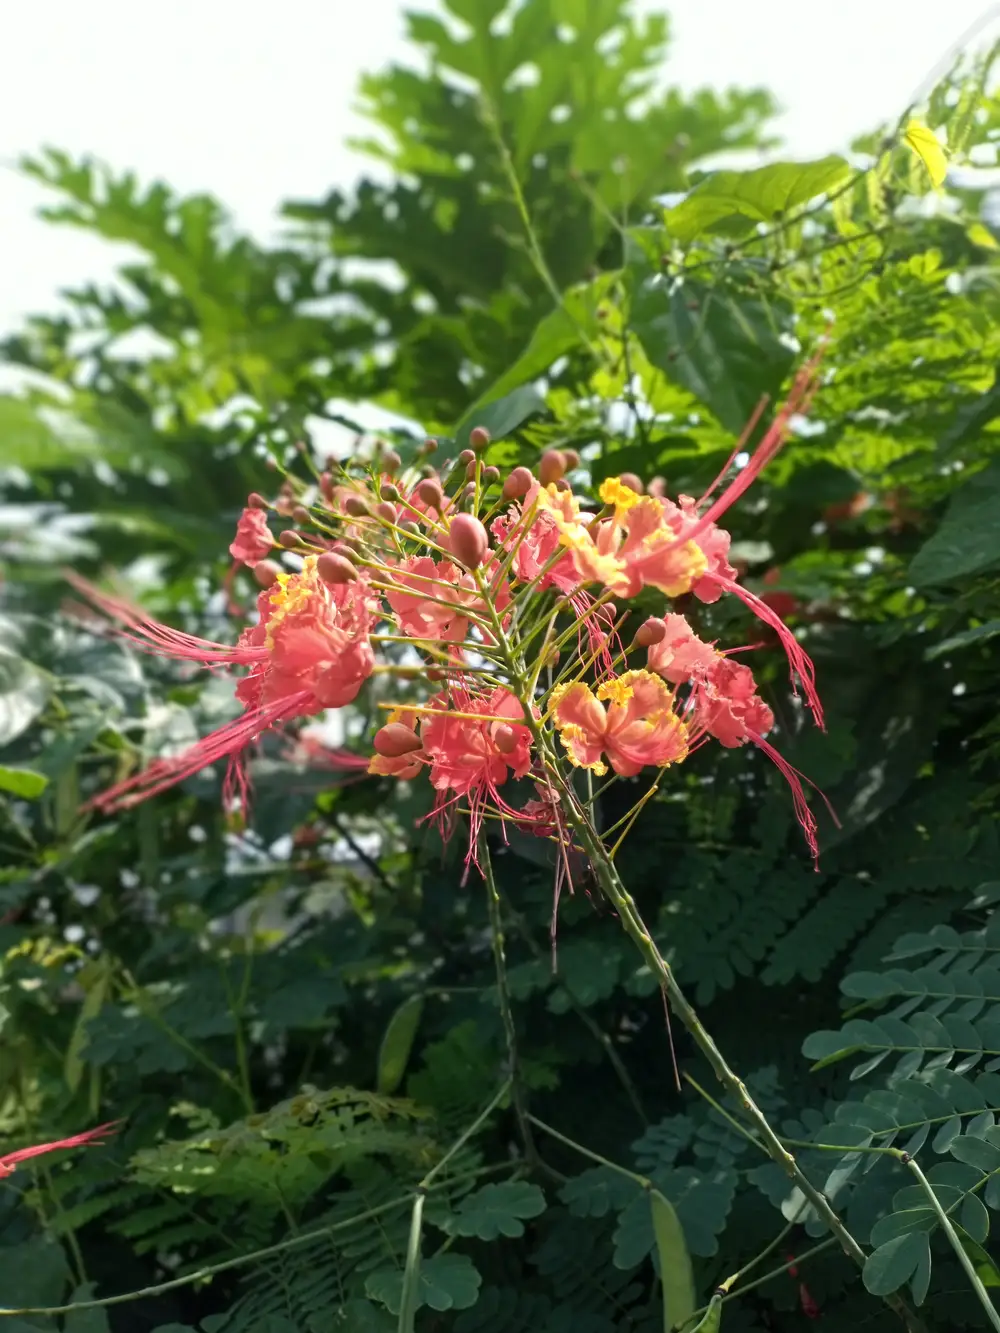 Flowers on a plant